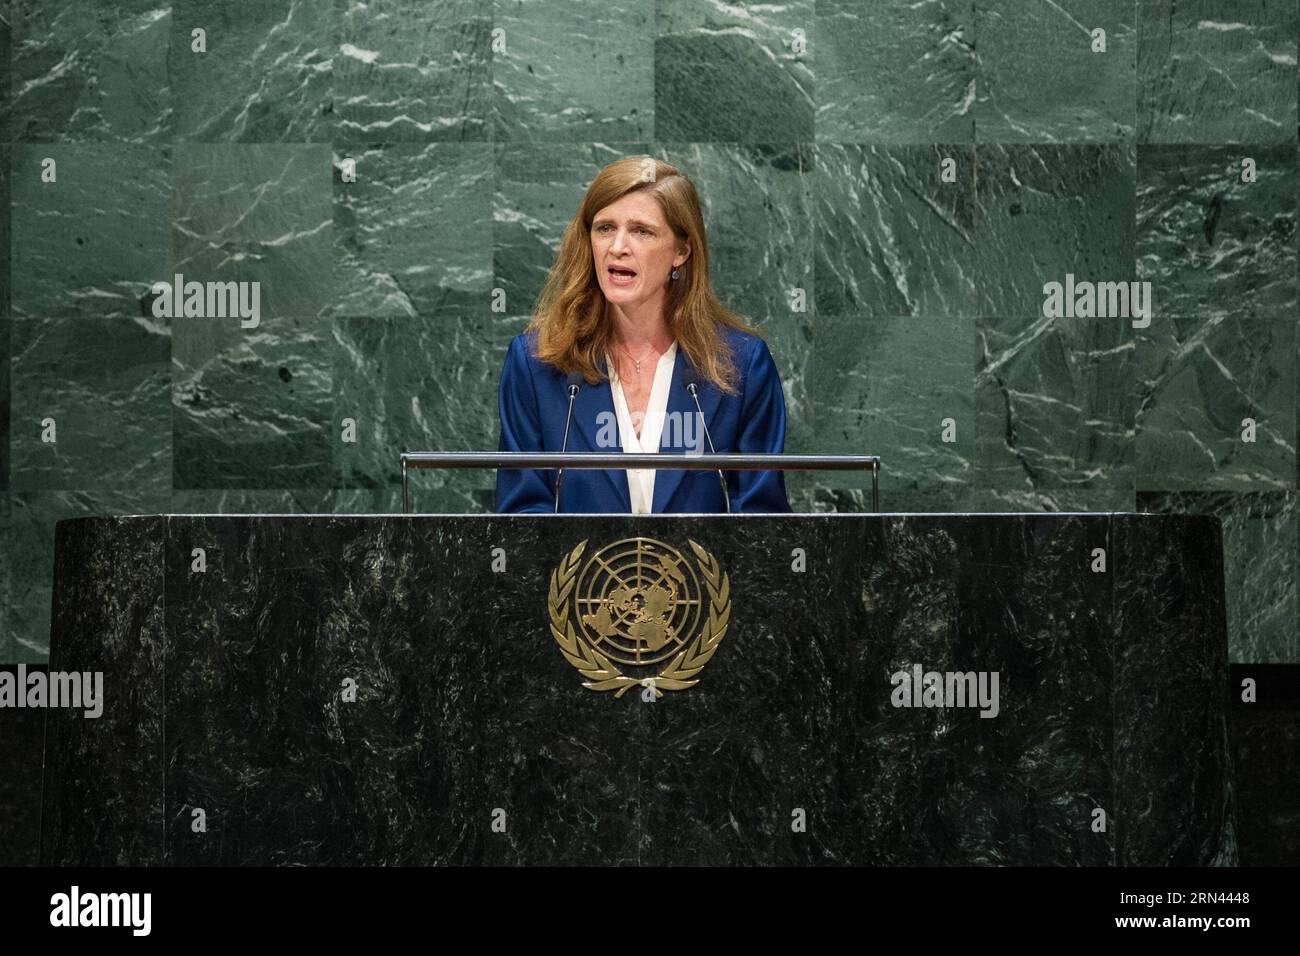 (150505) -- NEW YORK, May 5, 2015 -- Samantha Power, United States Permanent Representative to the United Nations, speaks during a UN General Assembly s special meeting to commemorate all victims of WWII at the UN headquarters in New York on May 5, 2015. A UN General Assembly (GA) special meeting kicked off here on Tuesday to commemorate victims of the Second World War. ) UN-NEW YORK-WWII-COMMEMORATION LixMuzi PUBLICATIONxNOTxINxCHN   New York May 5 2015 Samantha Power United States permanently Representative to The United Nations Speaks during a UN General Assembly S Special Meeting to commem Stock Photo